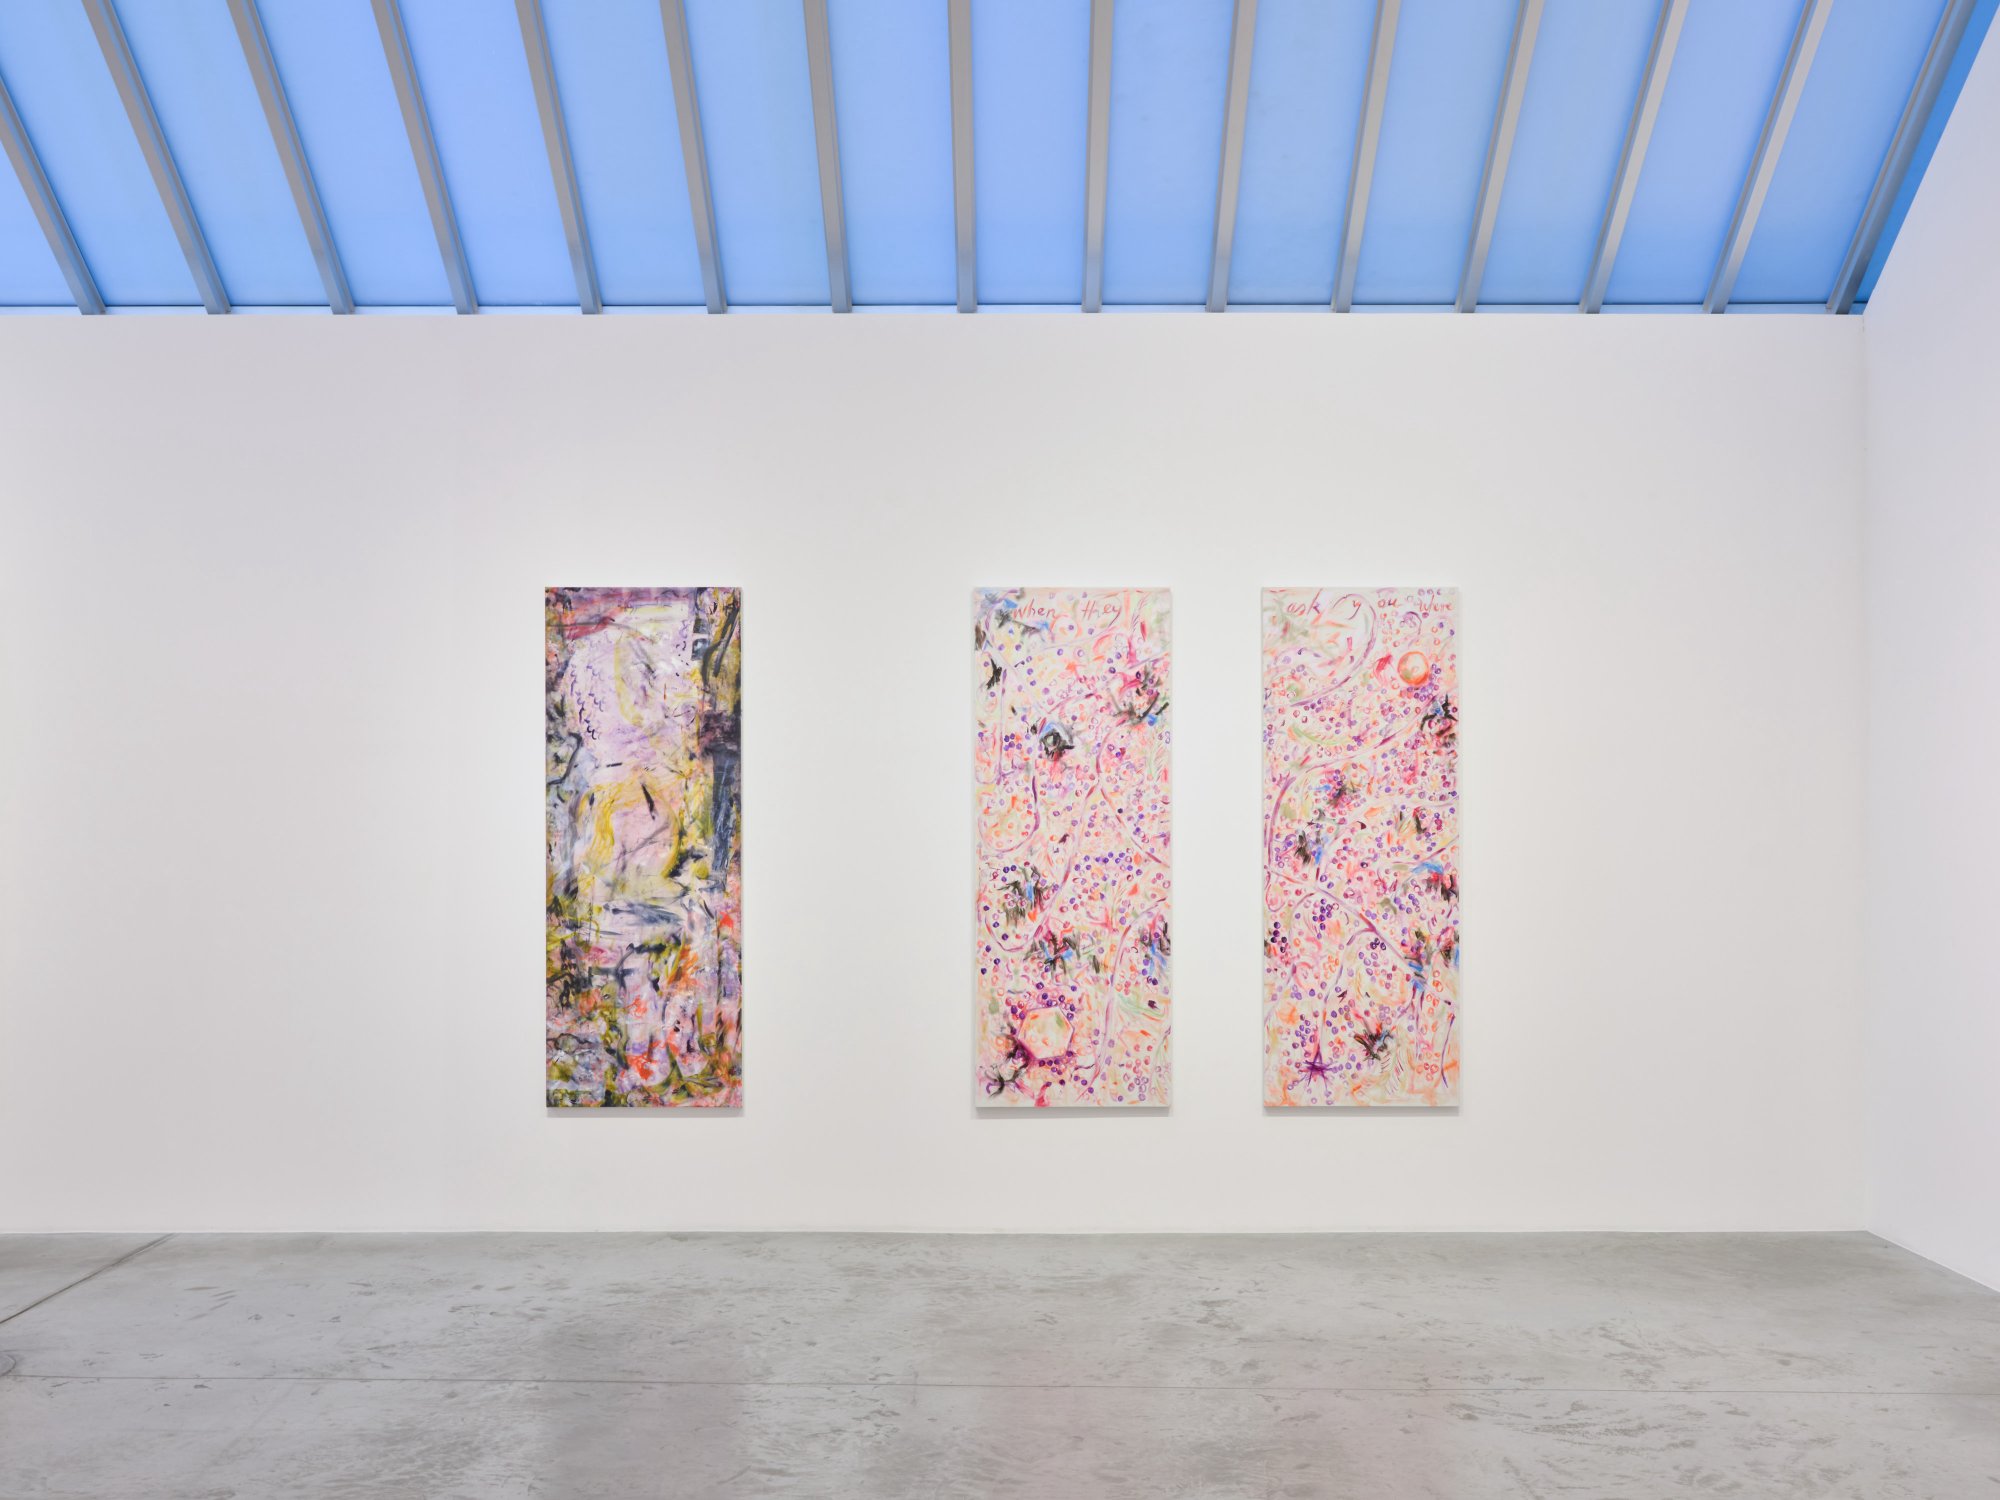 Installation image for Cecily Brown, Jutta Koether: Good Luck Spot, at Bortolami